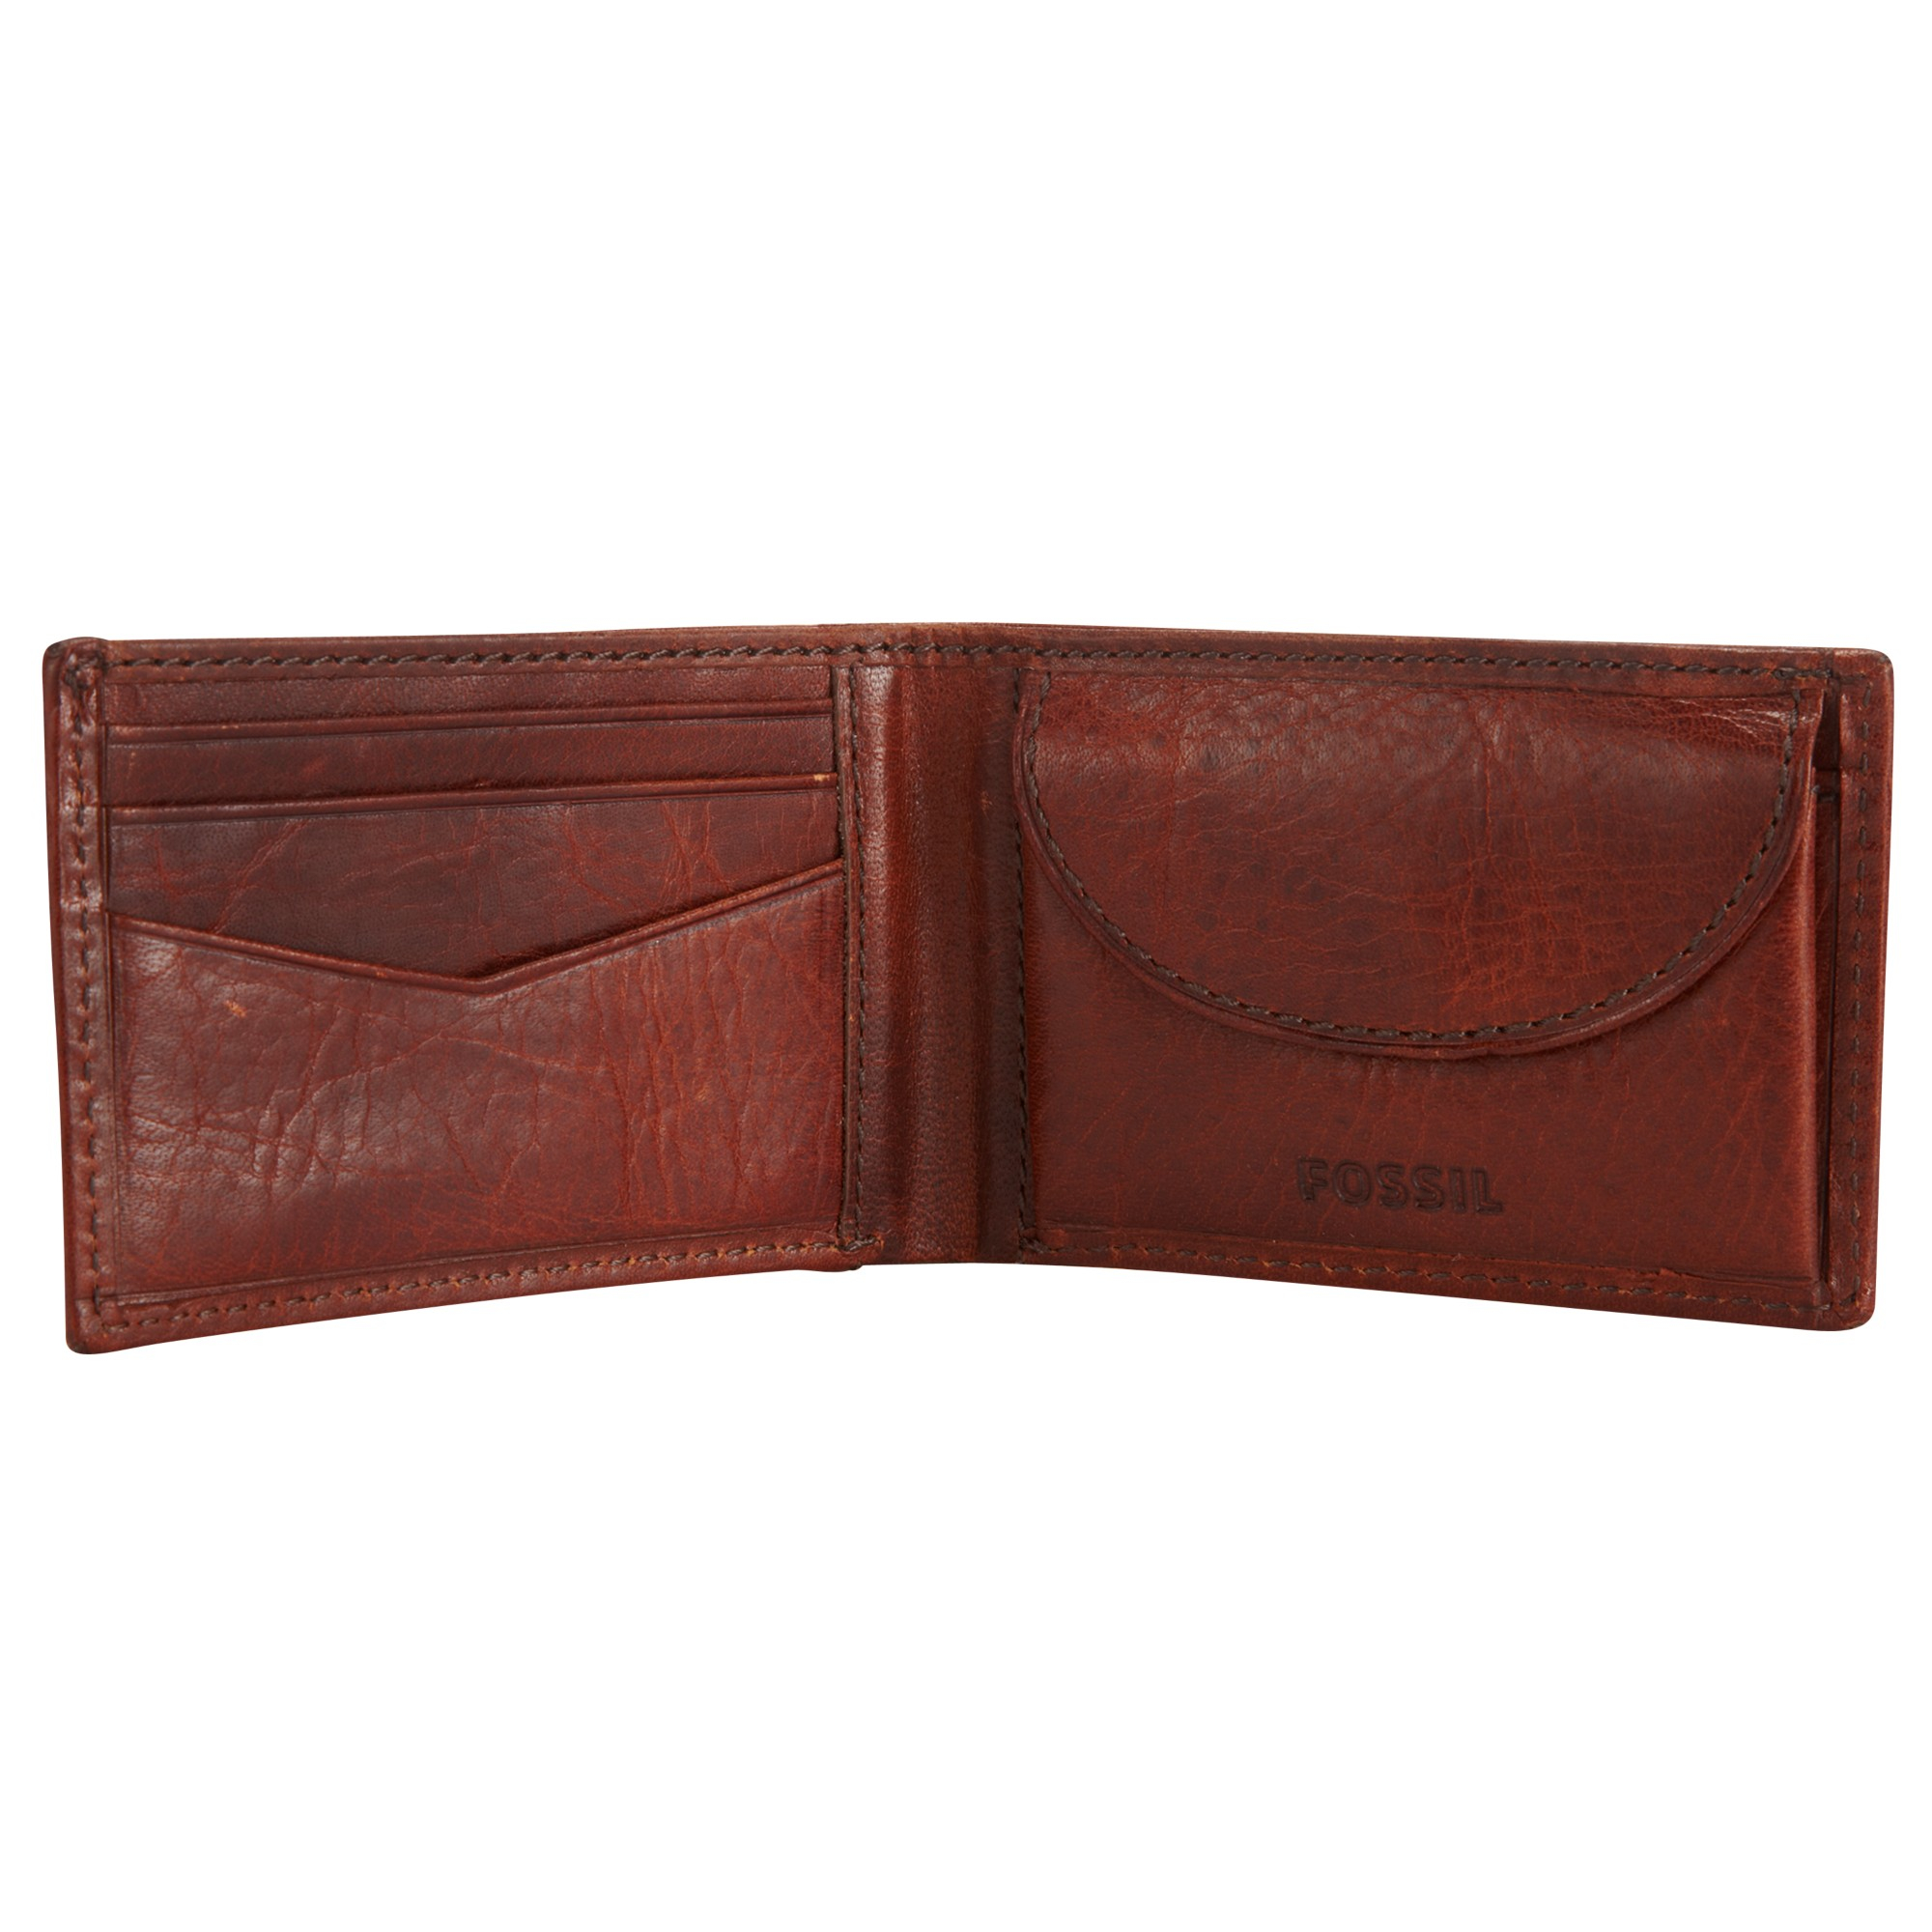 Fossil Connor Leather Coin Pocket Wallet in Cognac (Brown) for Men - Lyst